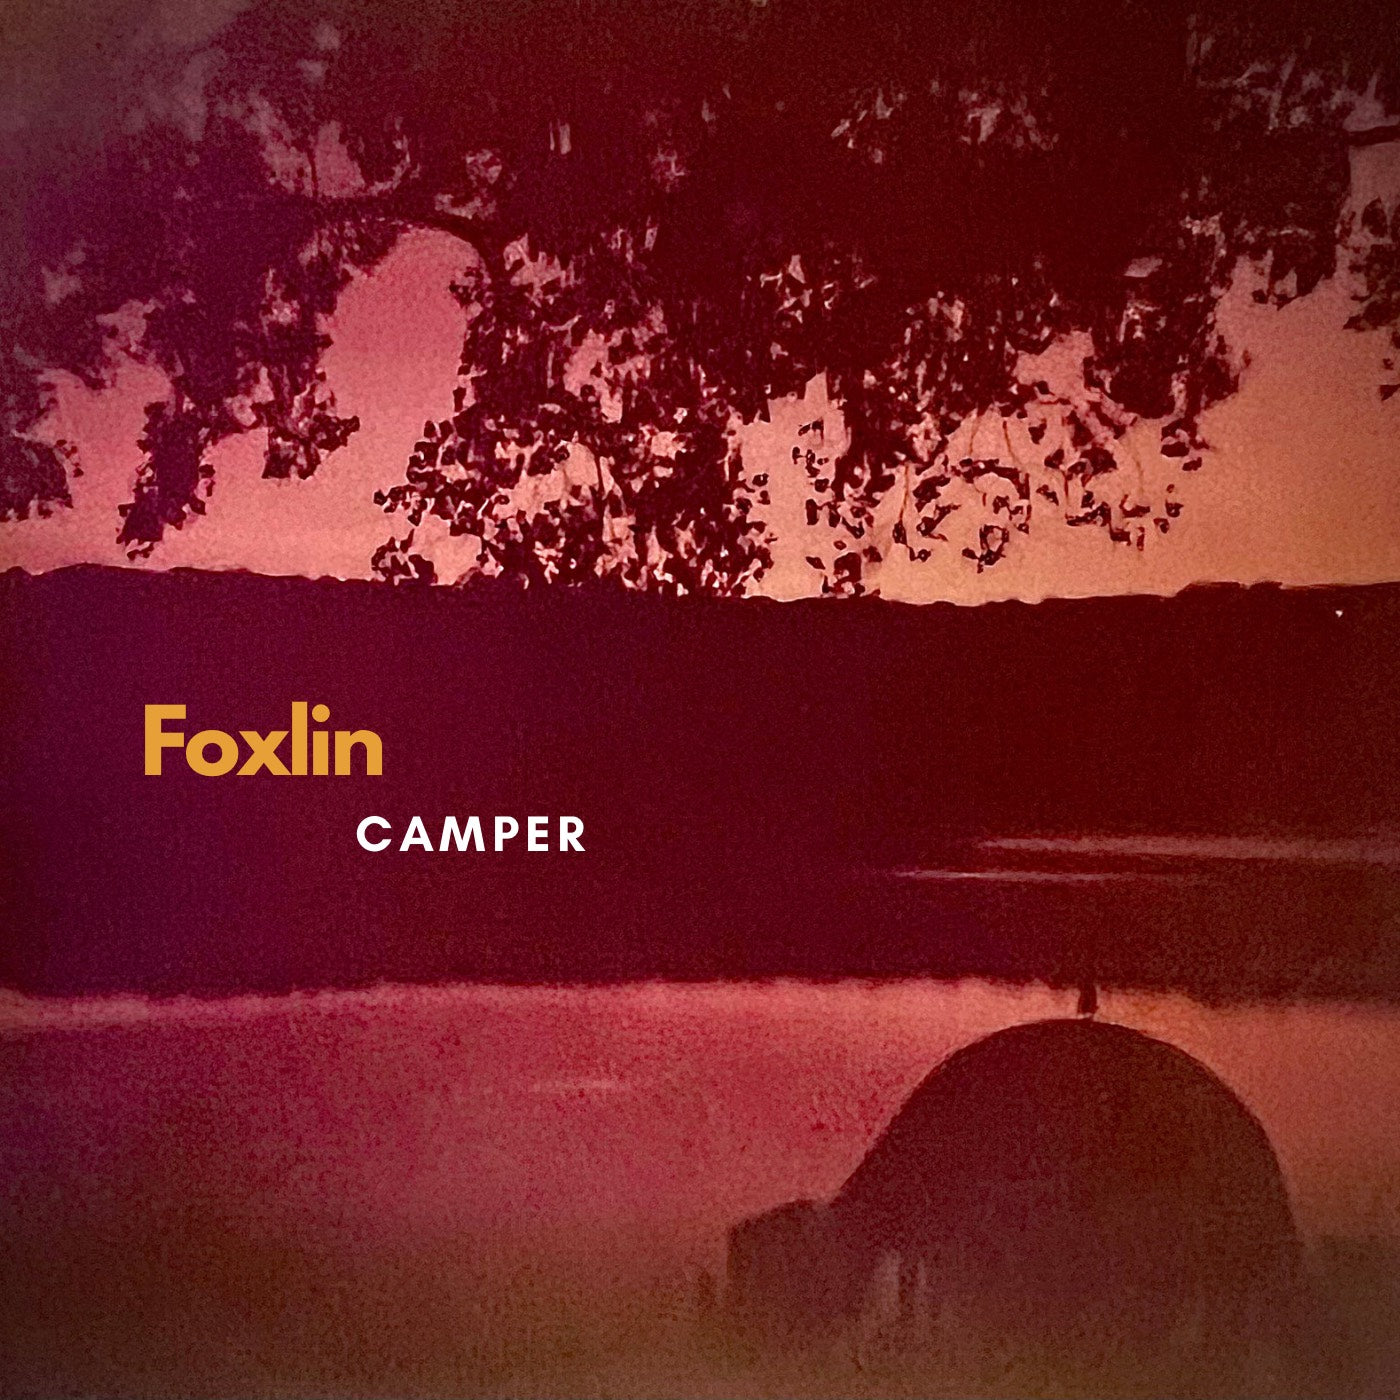 Foxlin shares an emotive indie rock adventure with new EP ‘Camper’